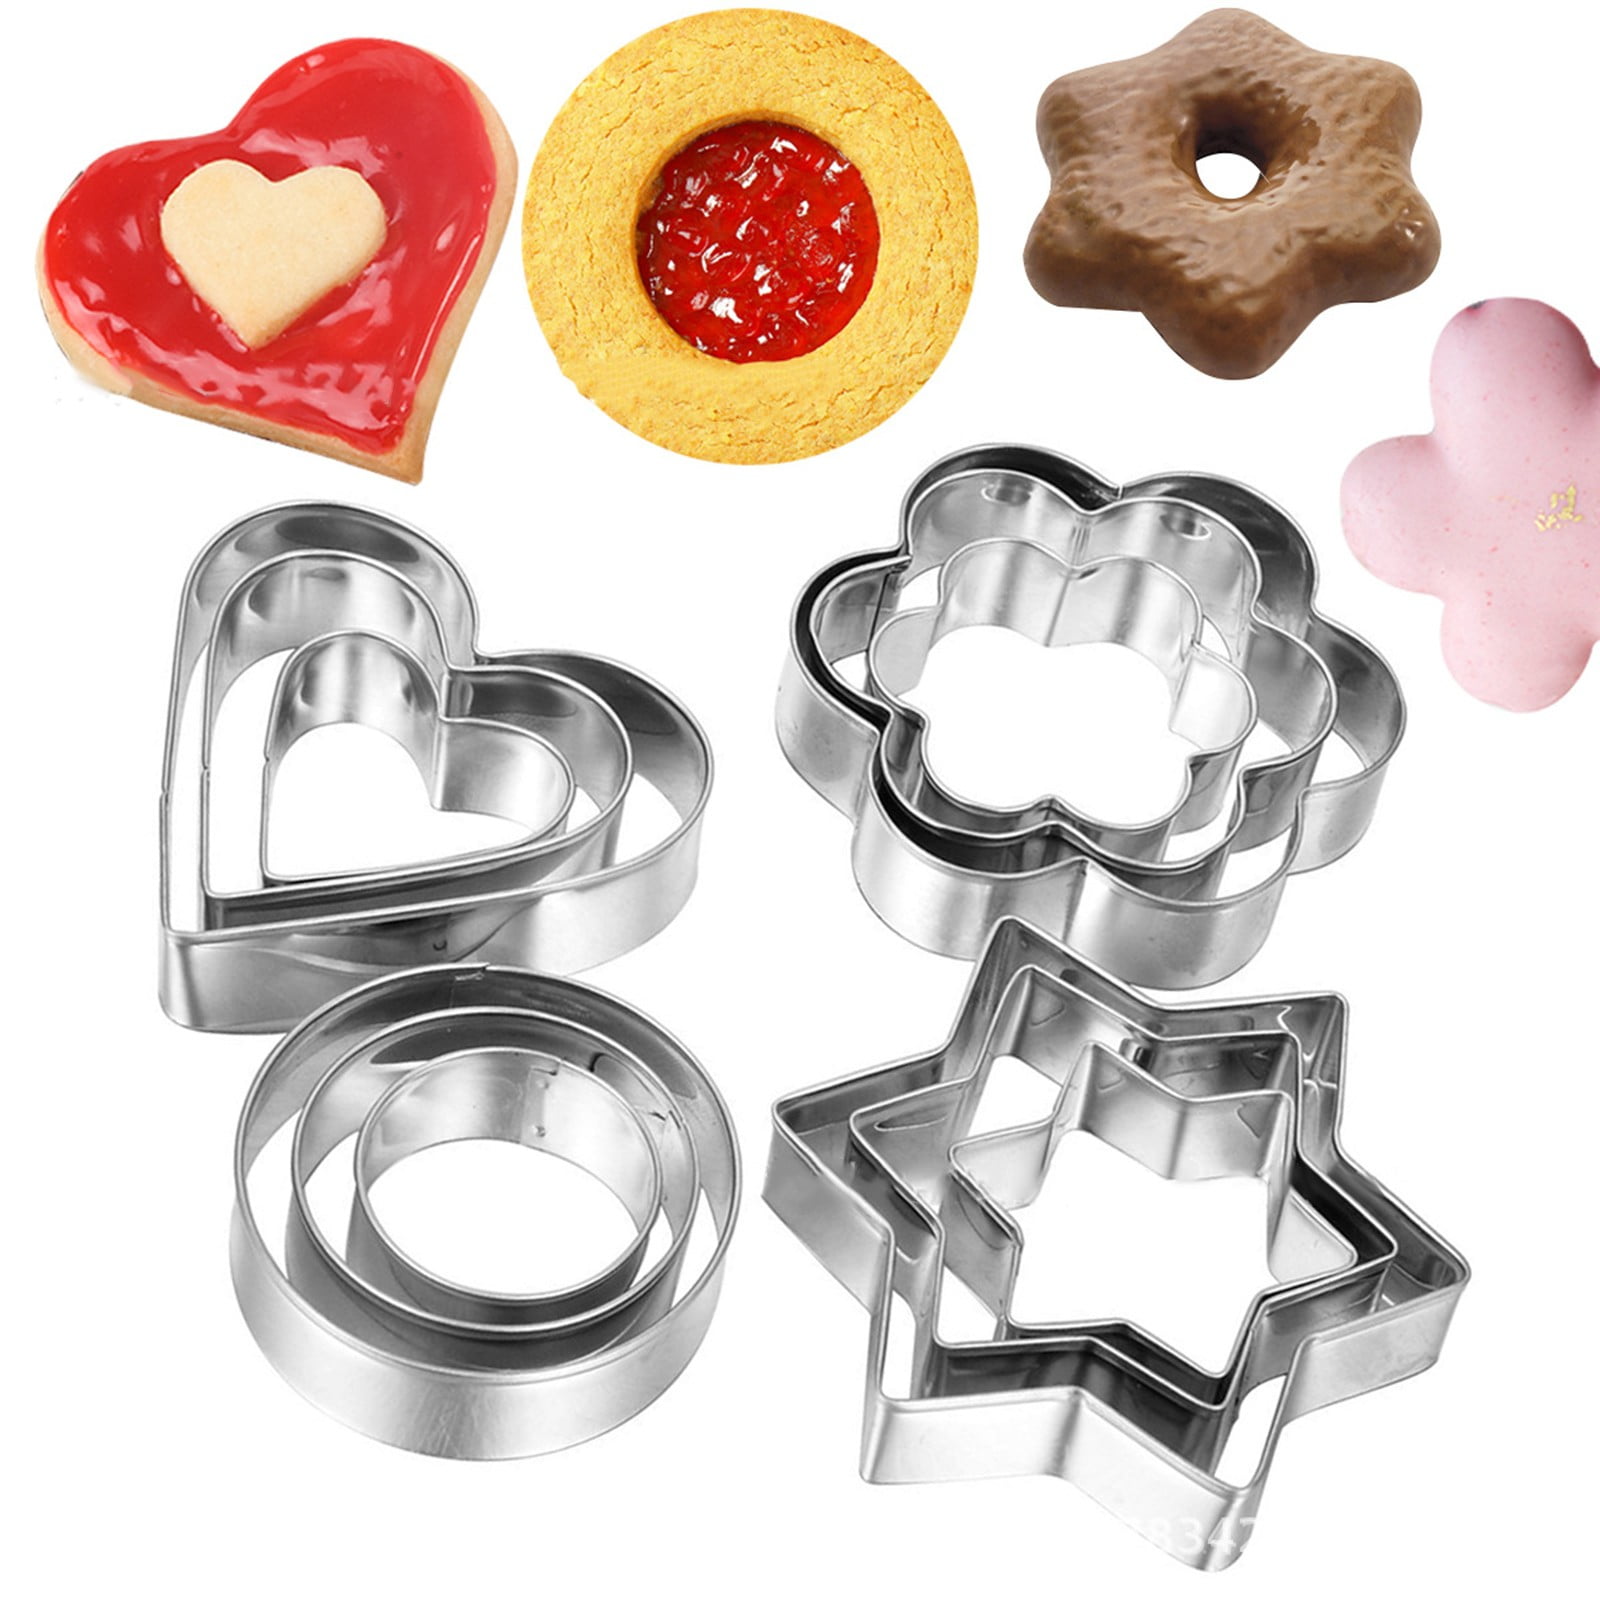 cookie cutter set stainless steel cutters baking cookies 12 pcs pastry biscuit